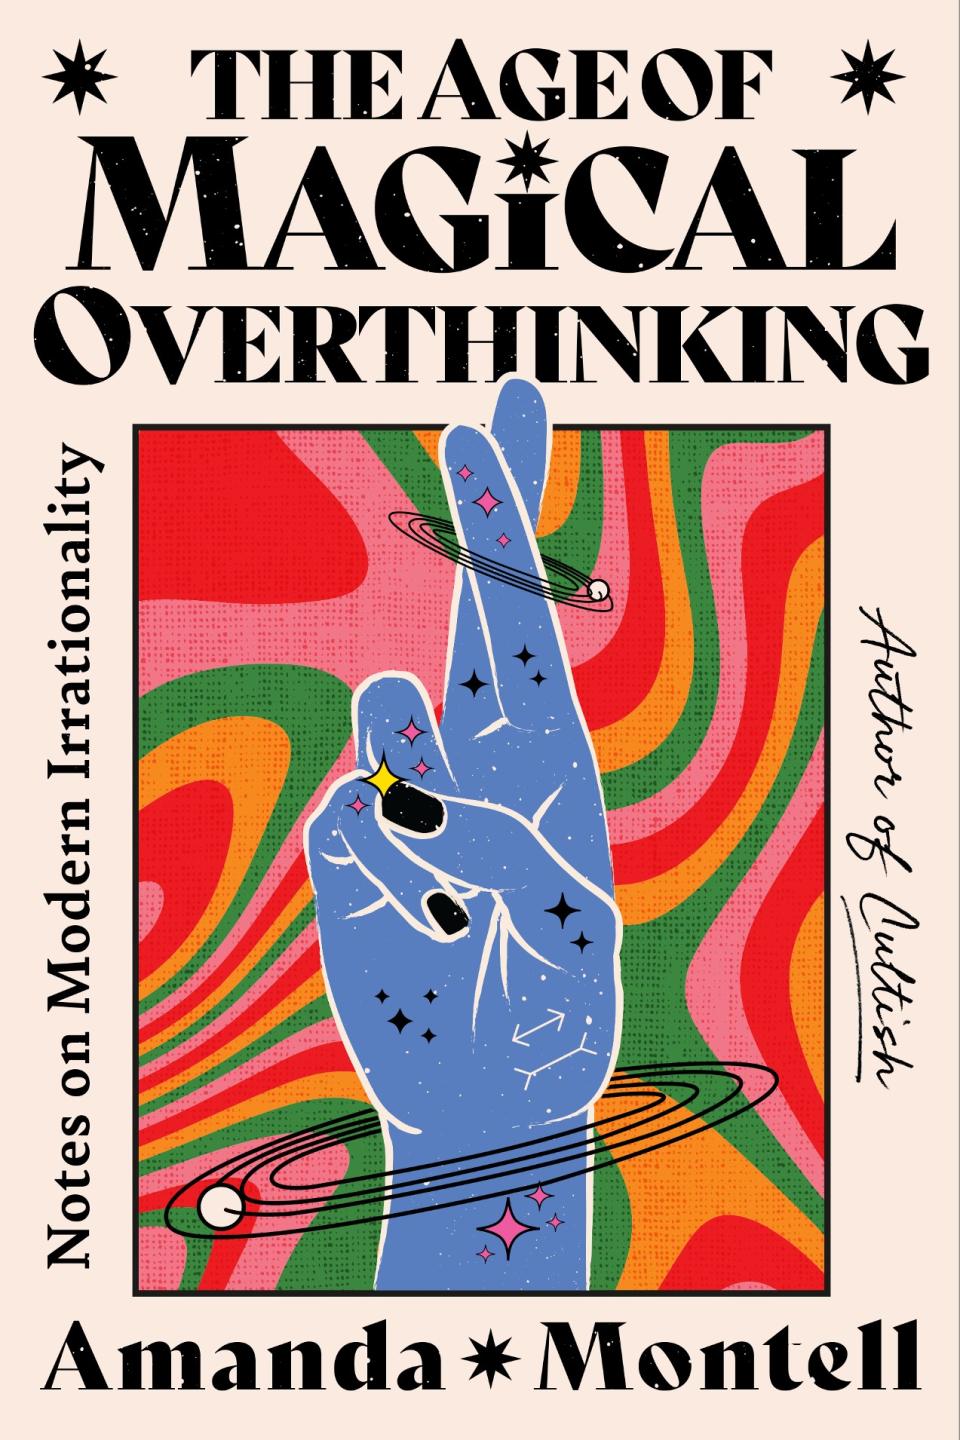 "The Age of Magical Overthinking: Notes on Modern Irrationality" by Amanda Montell